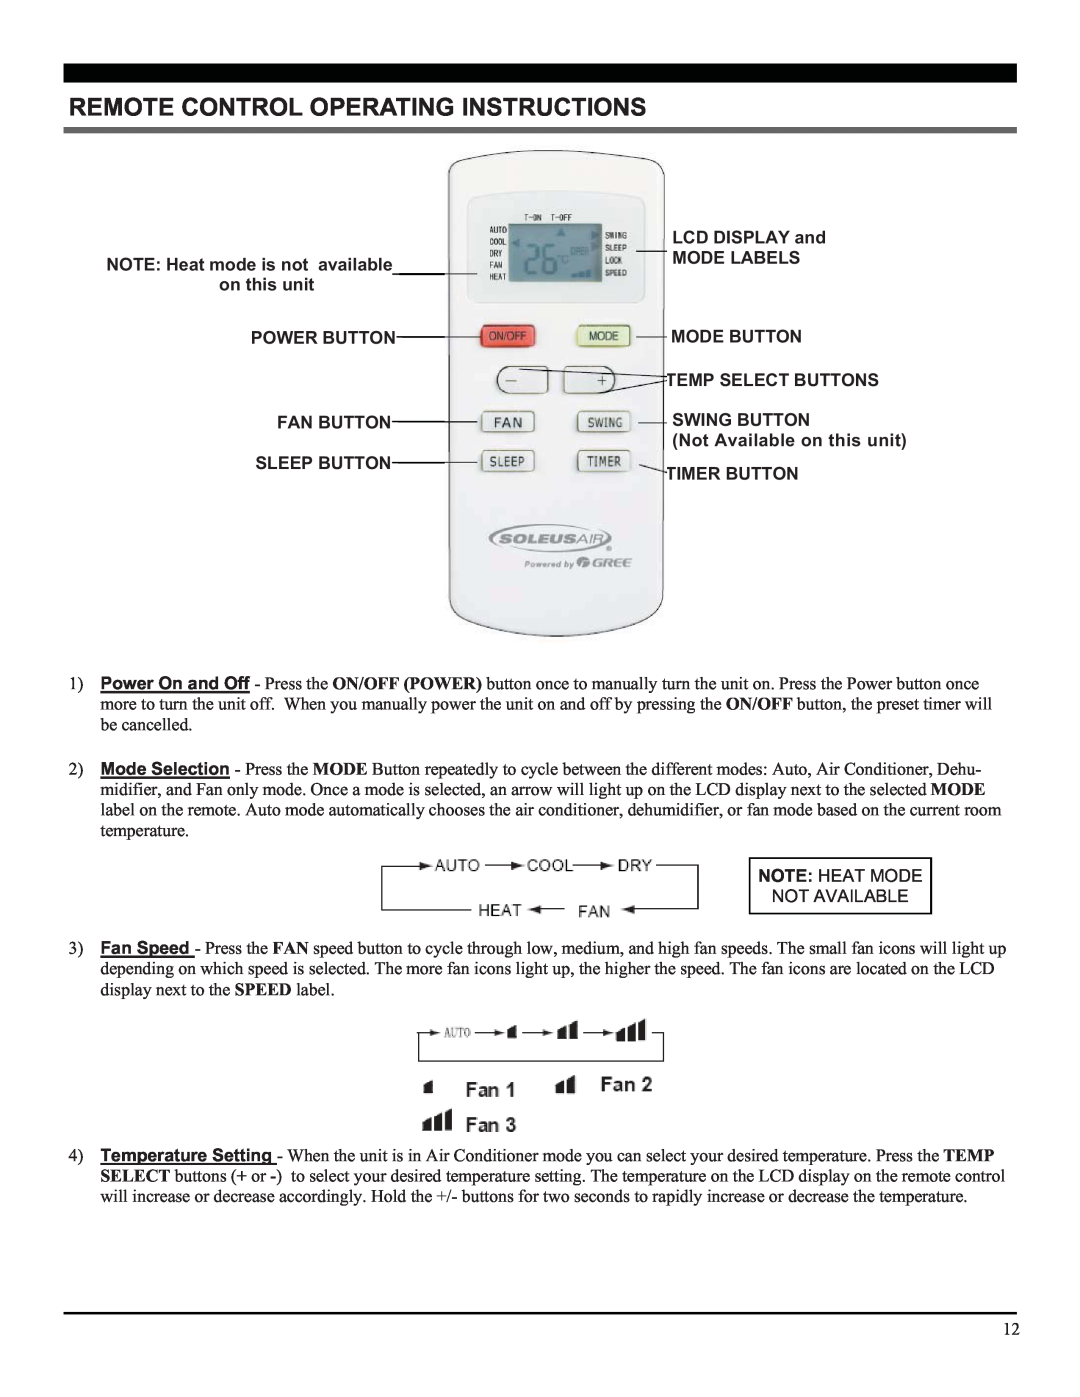 Soleus Air GM-PAC-10E2 manual Remote Control Operating Instructions, NOTE Heat mode is not available on this unit 